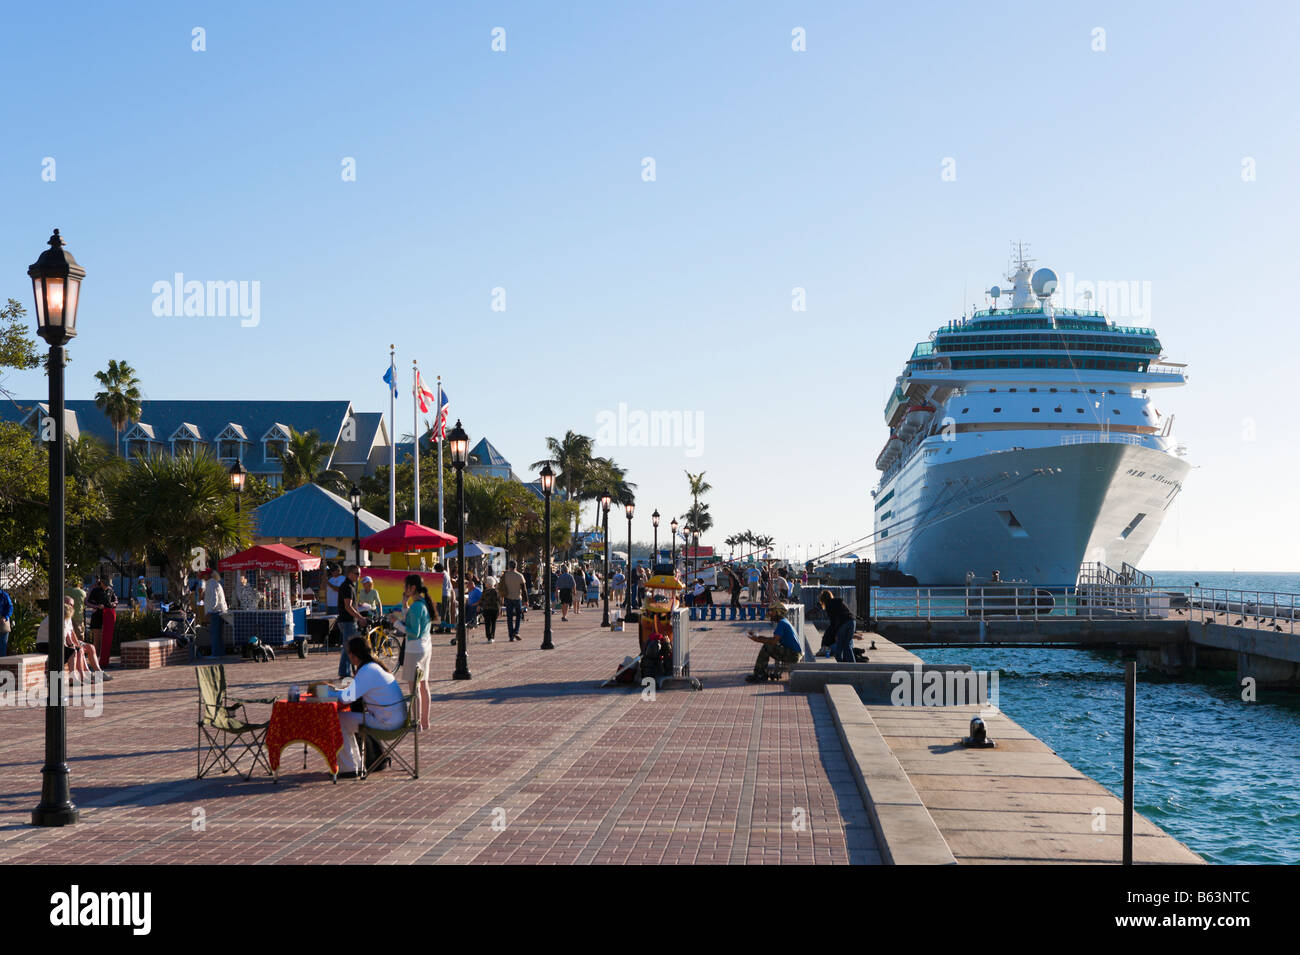 The Royal Caribbean cruise ship "Majesty of the Seas" docked at the cruise  terminal at Key West in late afternoon, Florida Keys Stock Photo - Alamy